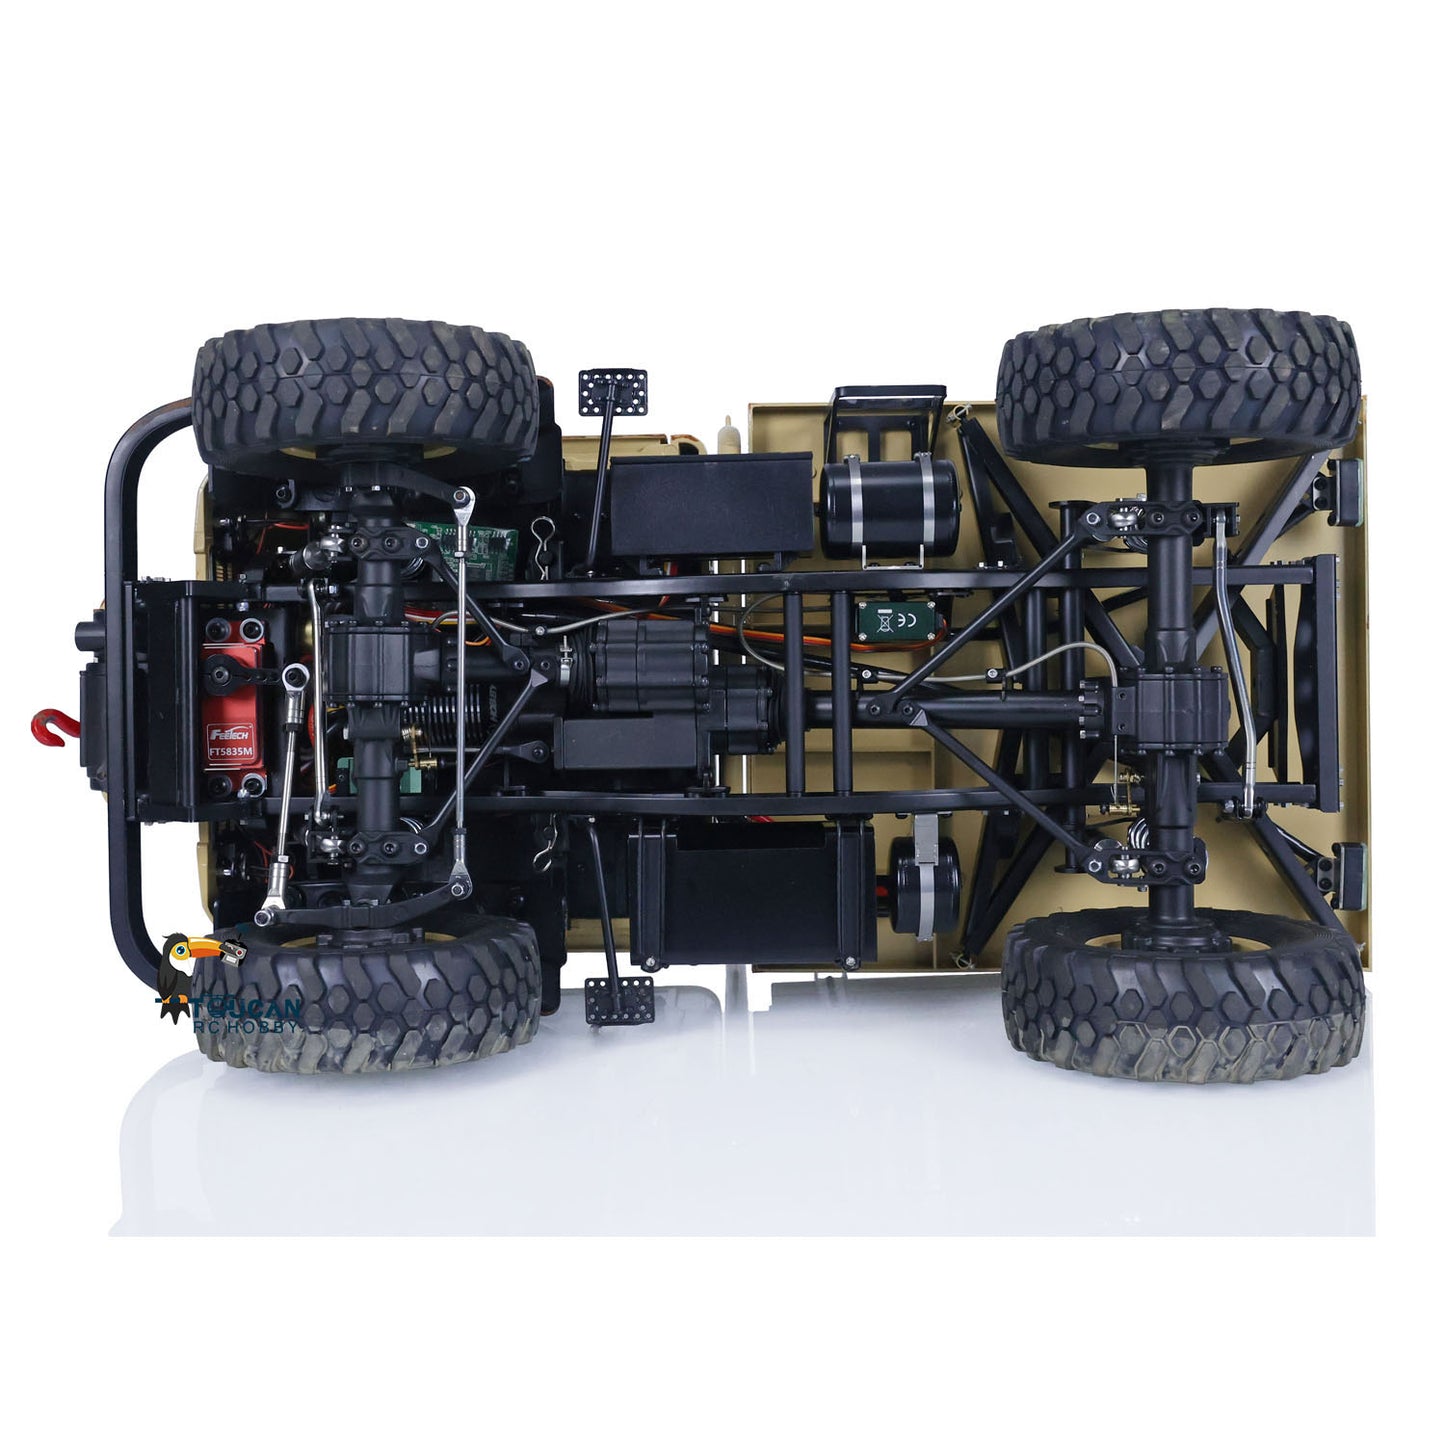 LESU 4x4 1/10 RAVE-UM406 Upgraded Brushless Motor ESC Sound Light Winch Remote Control Climbing Truck  RC Off-Road Vehicle Model